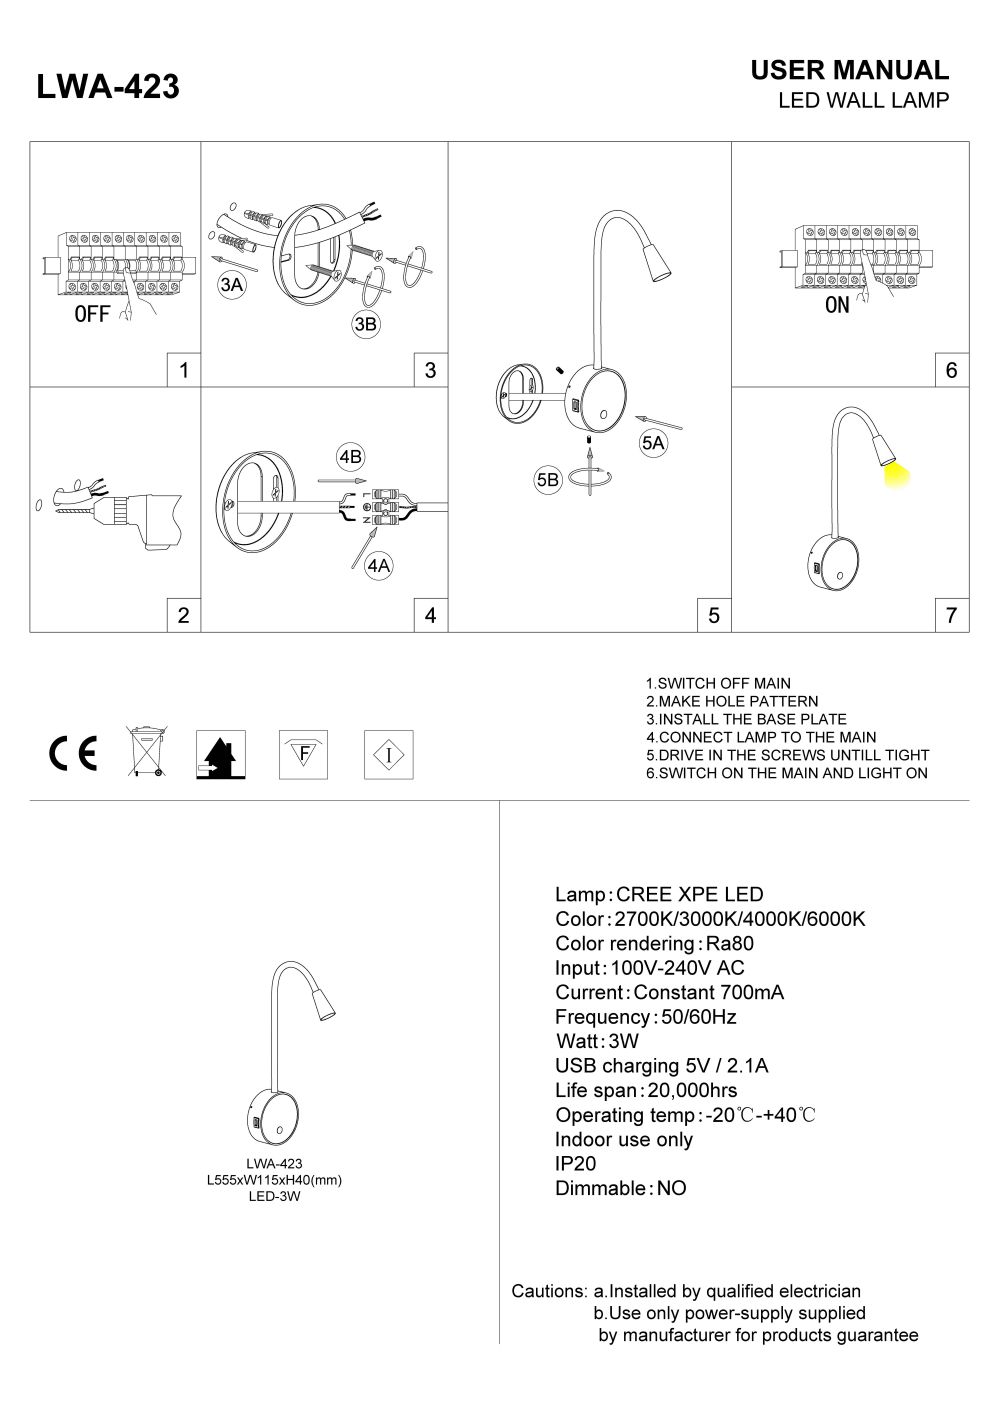 LWA-423 wall mounted LED reading light with USB installation guide